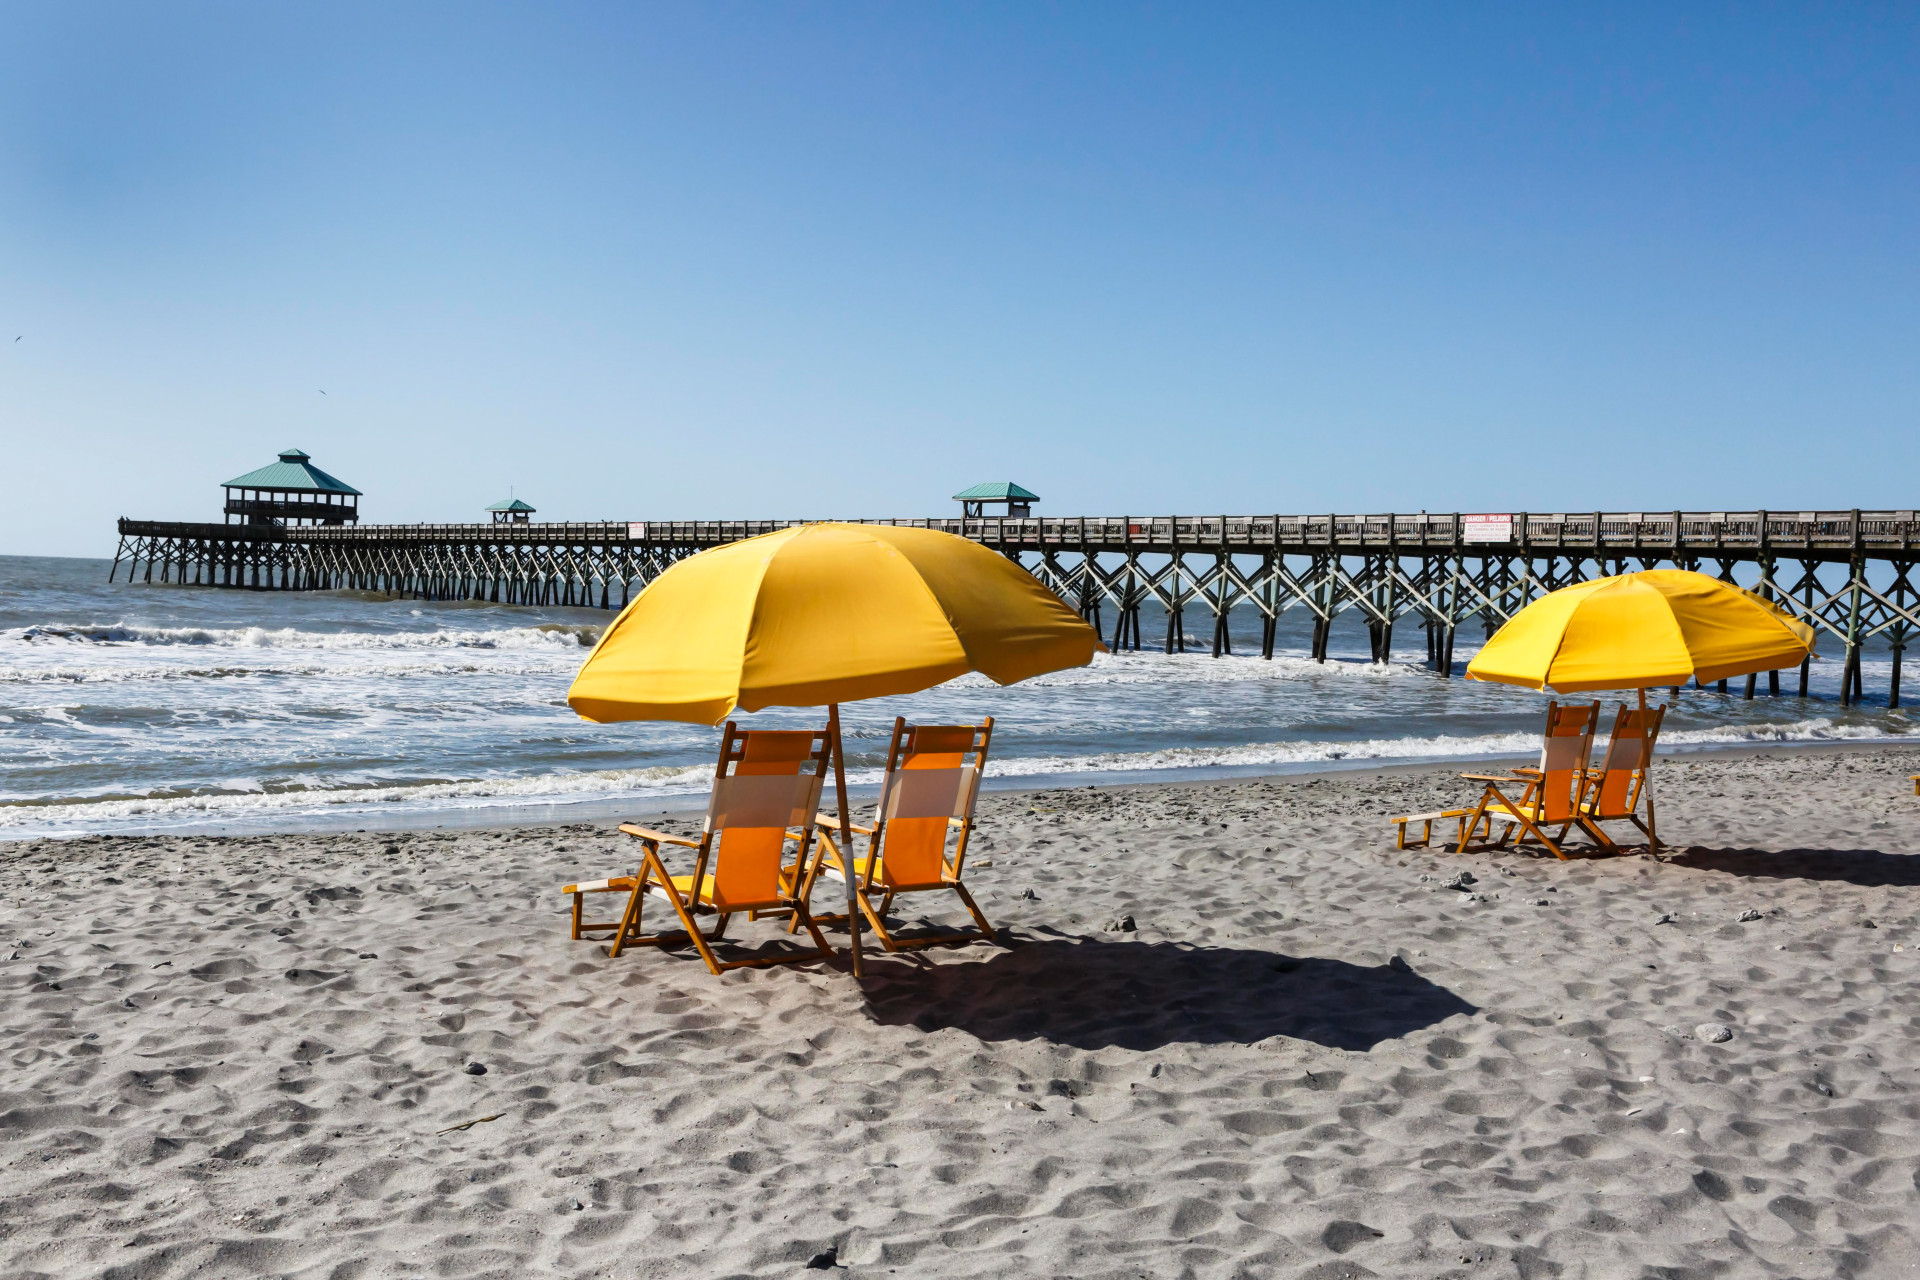 Head to beautiful Folly beach for a dip in the Atlantic.